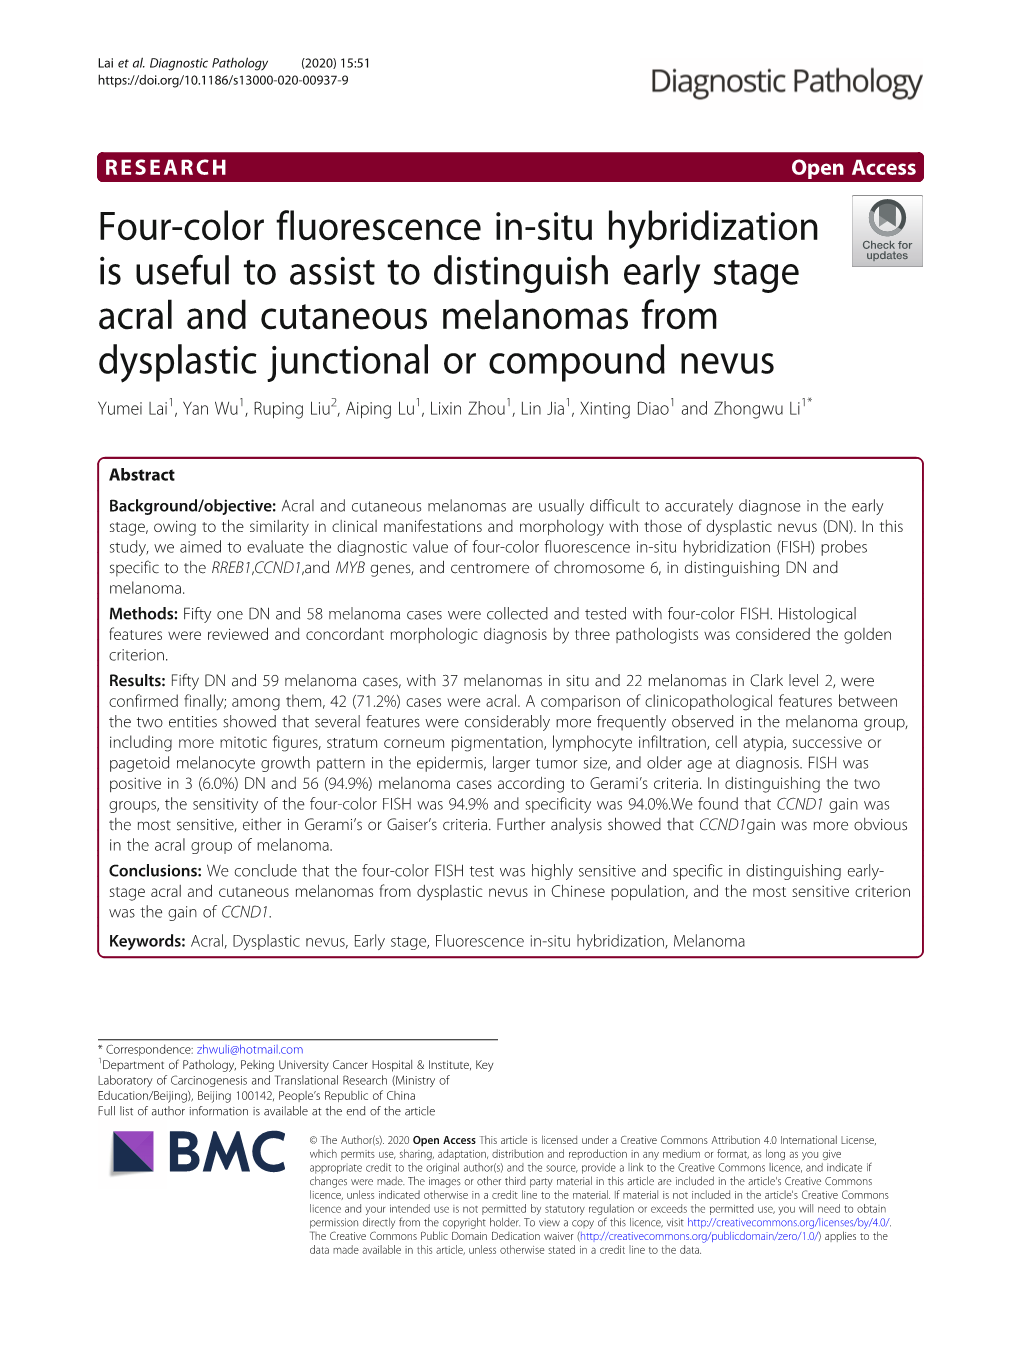 Four-Color Fluorescence In-Situ Hybridization Is Useful to Assist To